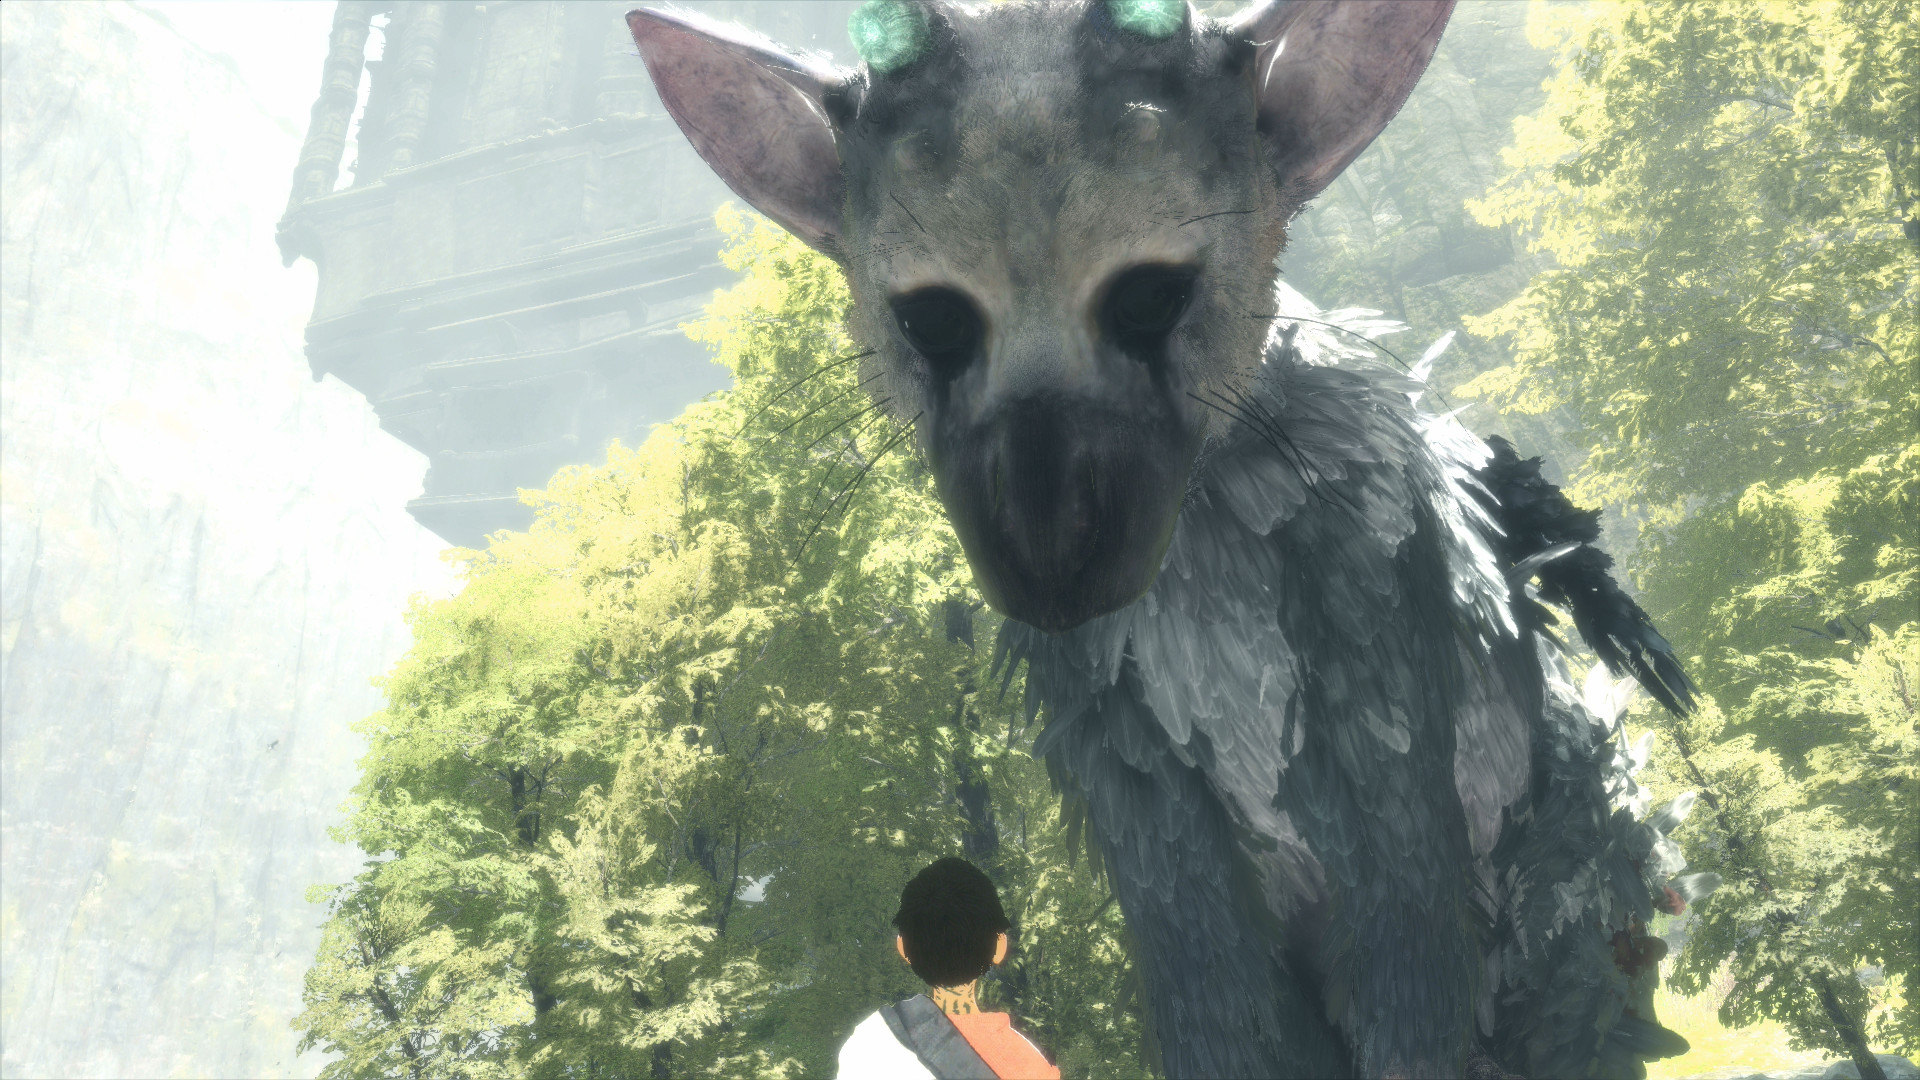 the last guardian ps5